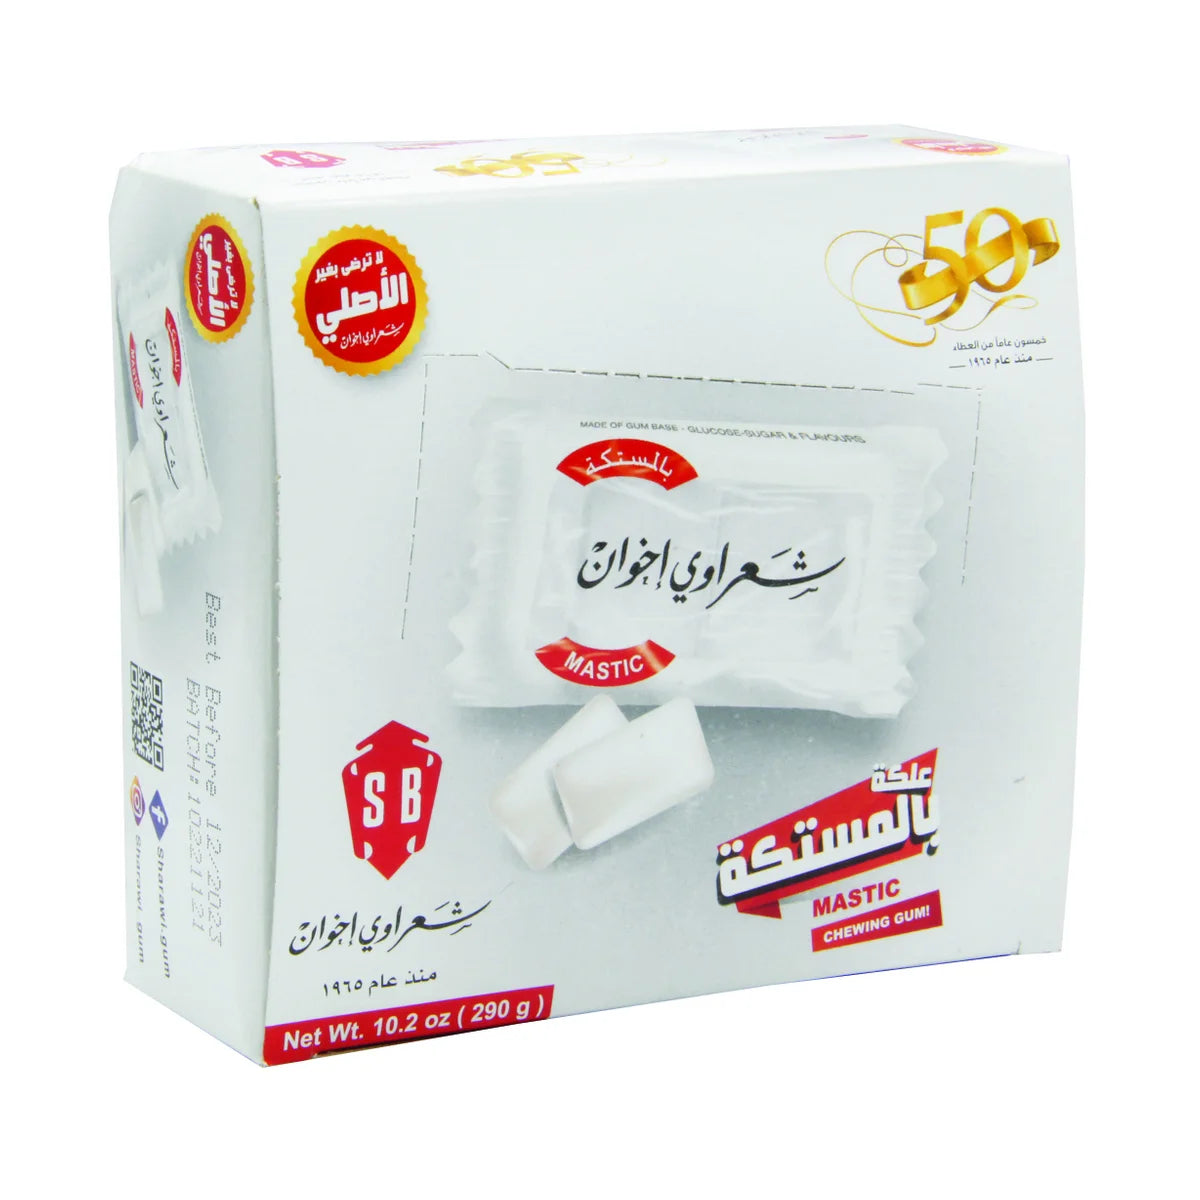 sharawi-mastic-chewing-gum-100-ct-290g